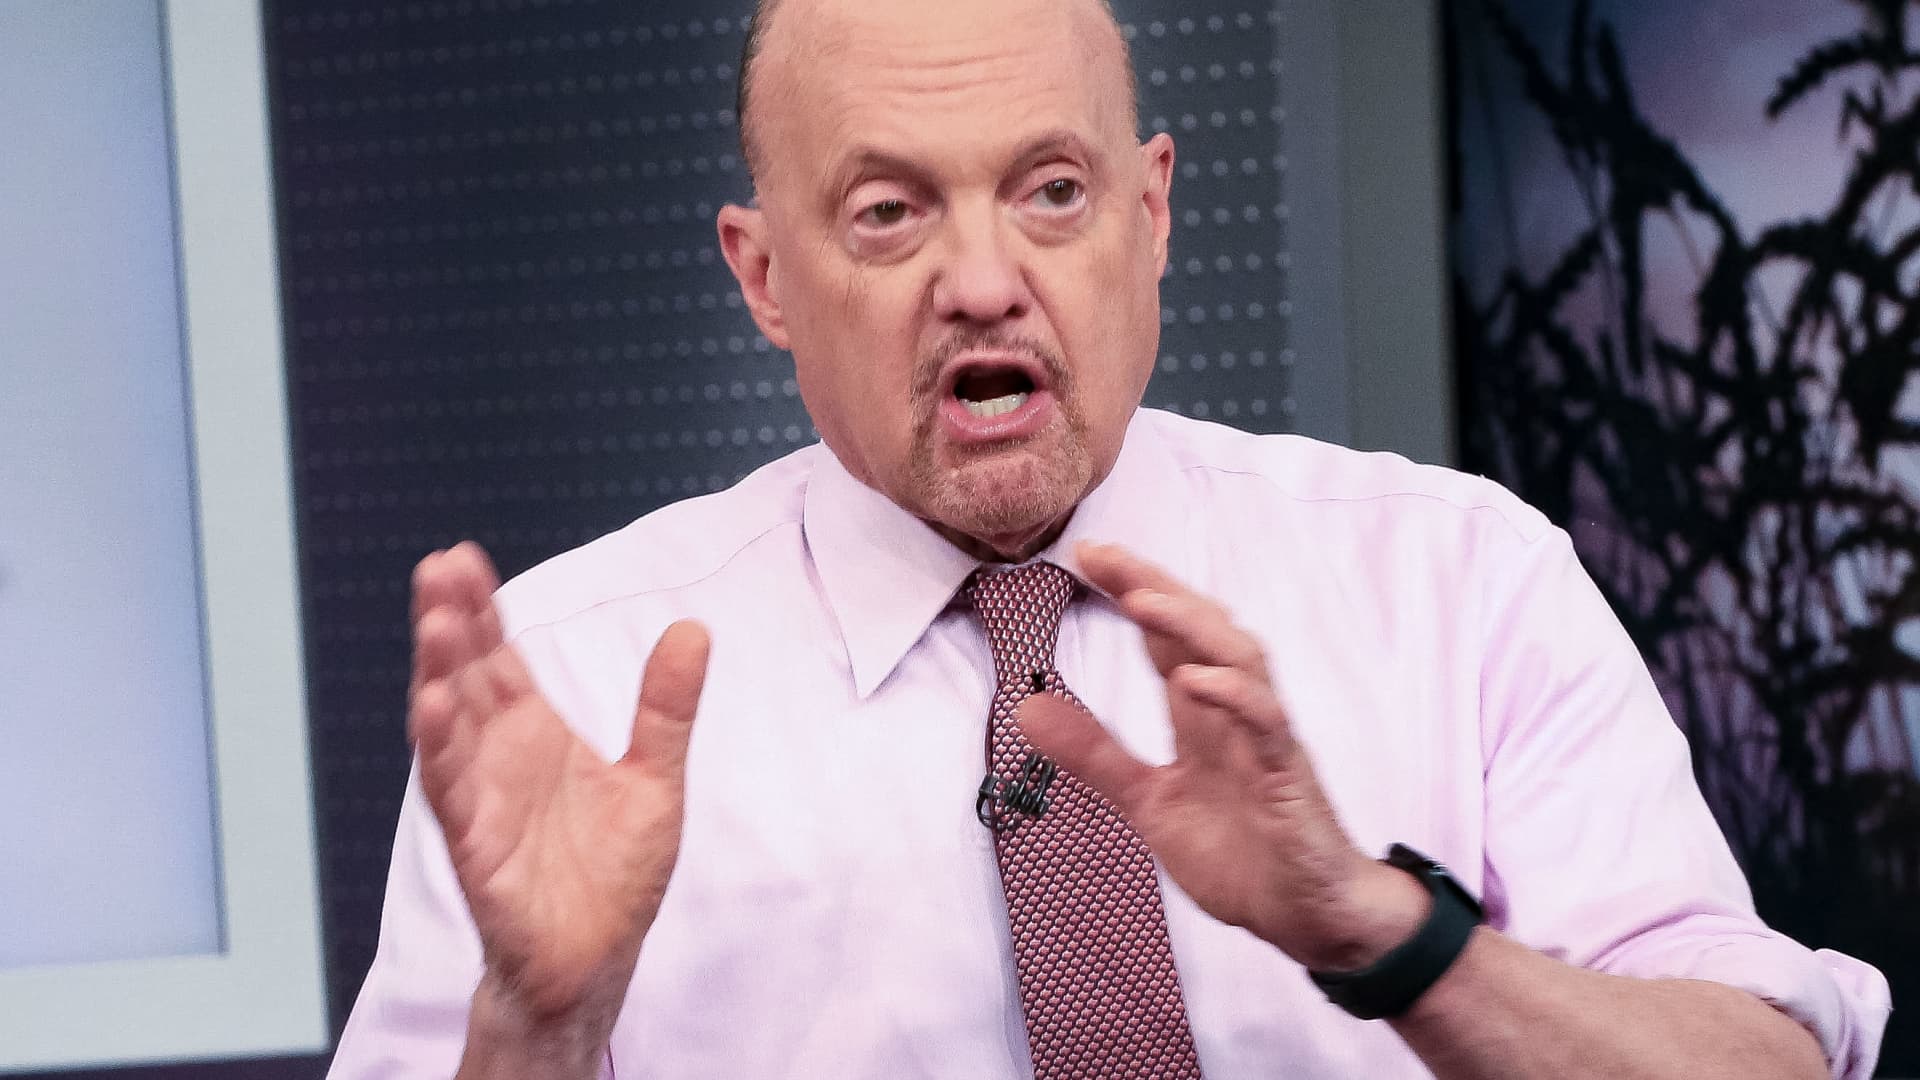 Cramer’s week ahead: There could be ‘real signs’ for the Fed to slow down